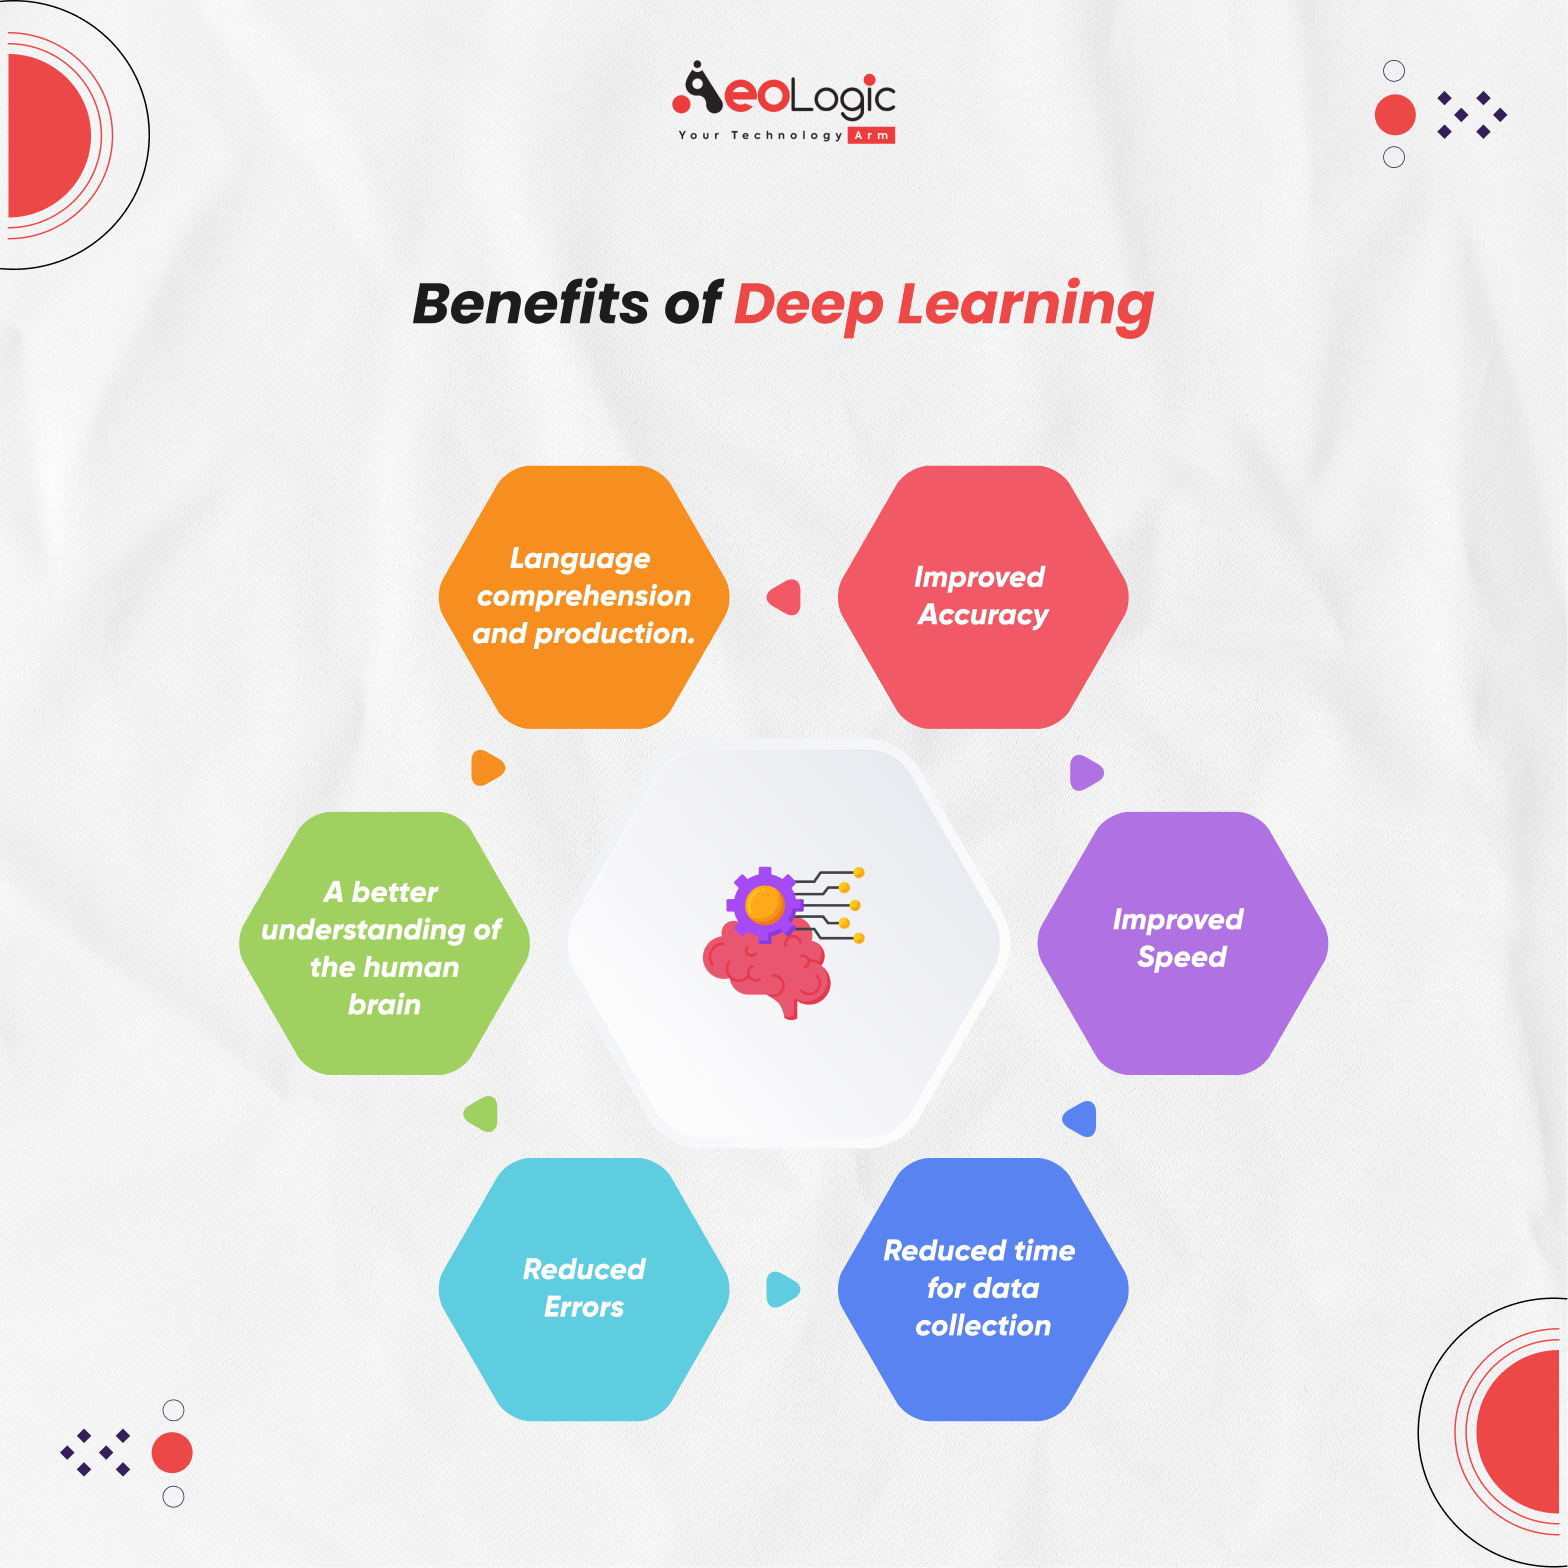 Benefits of Deep Learning